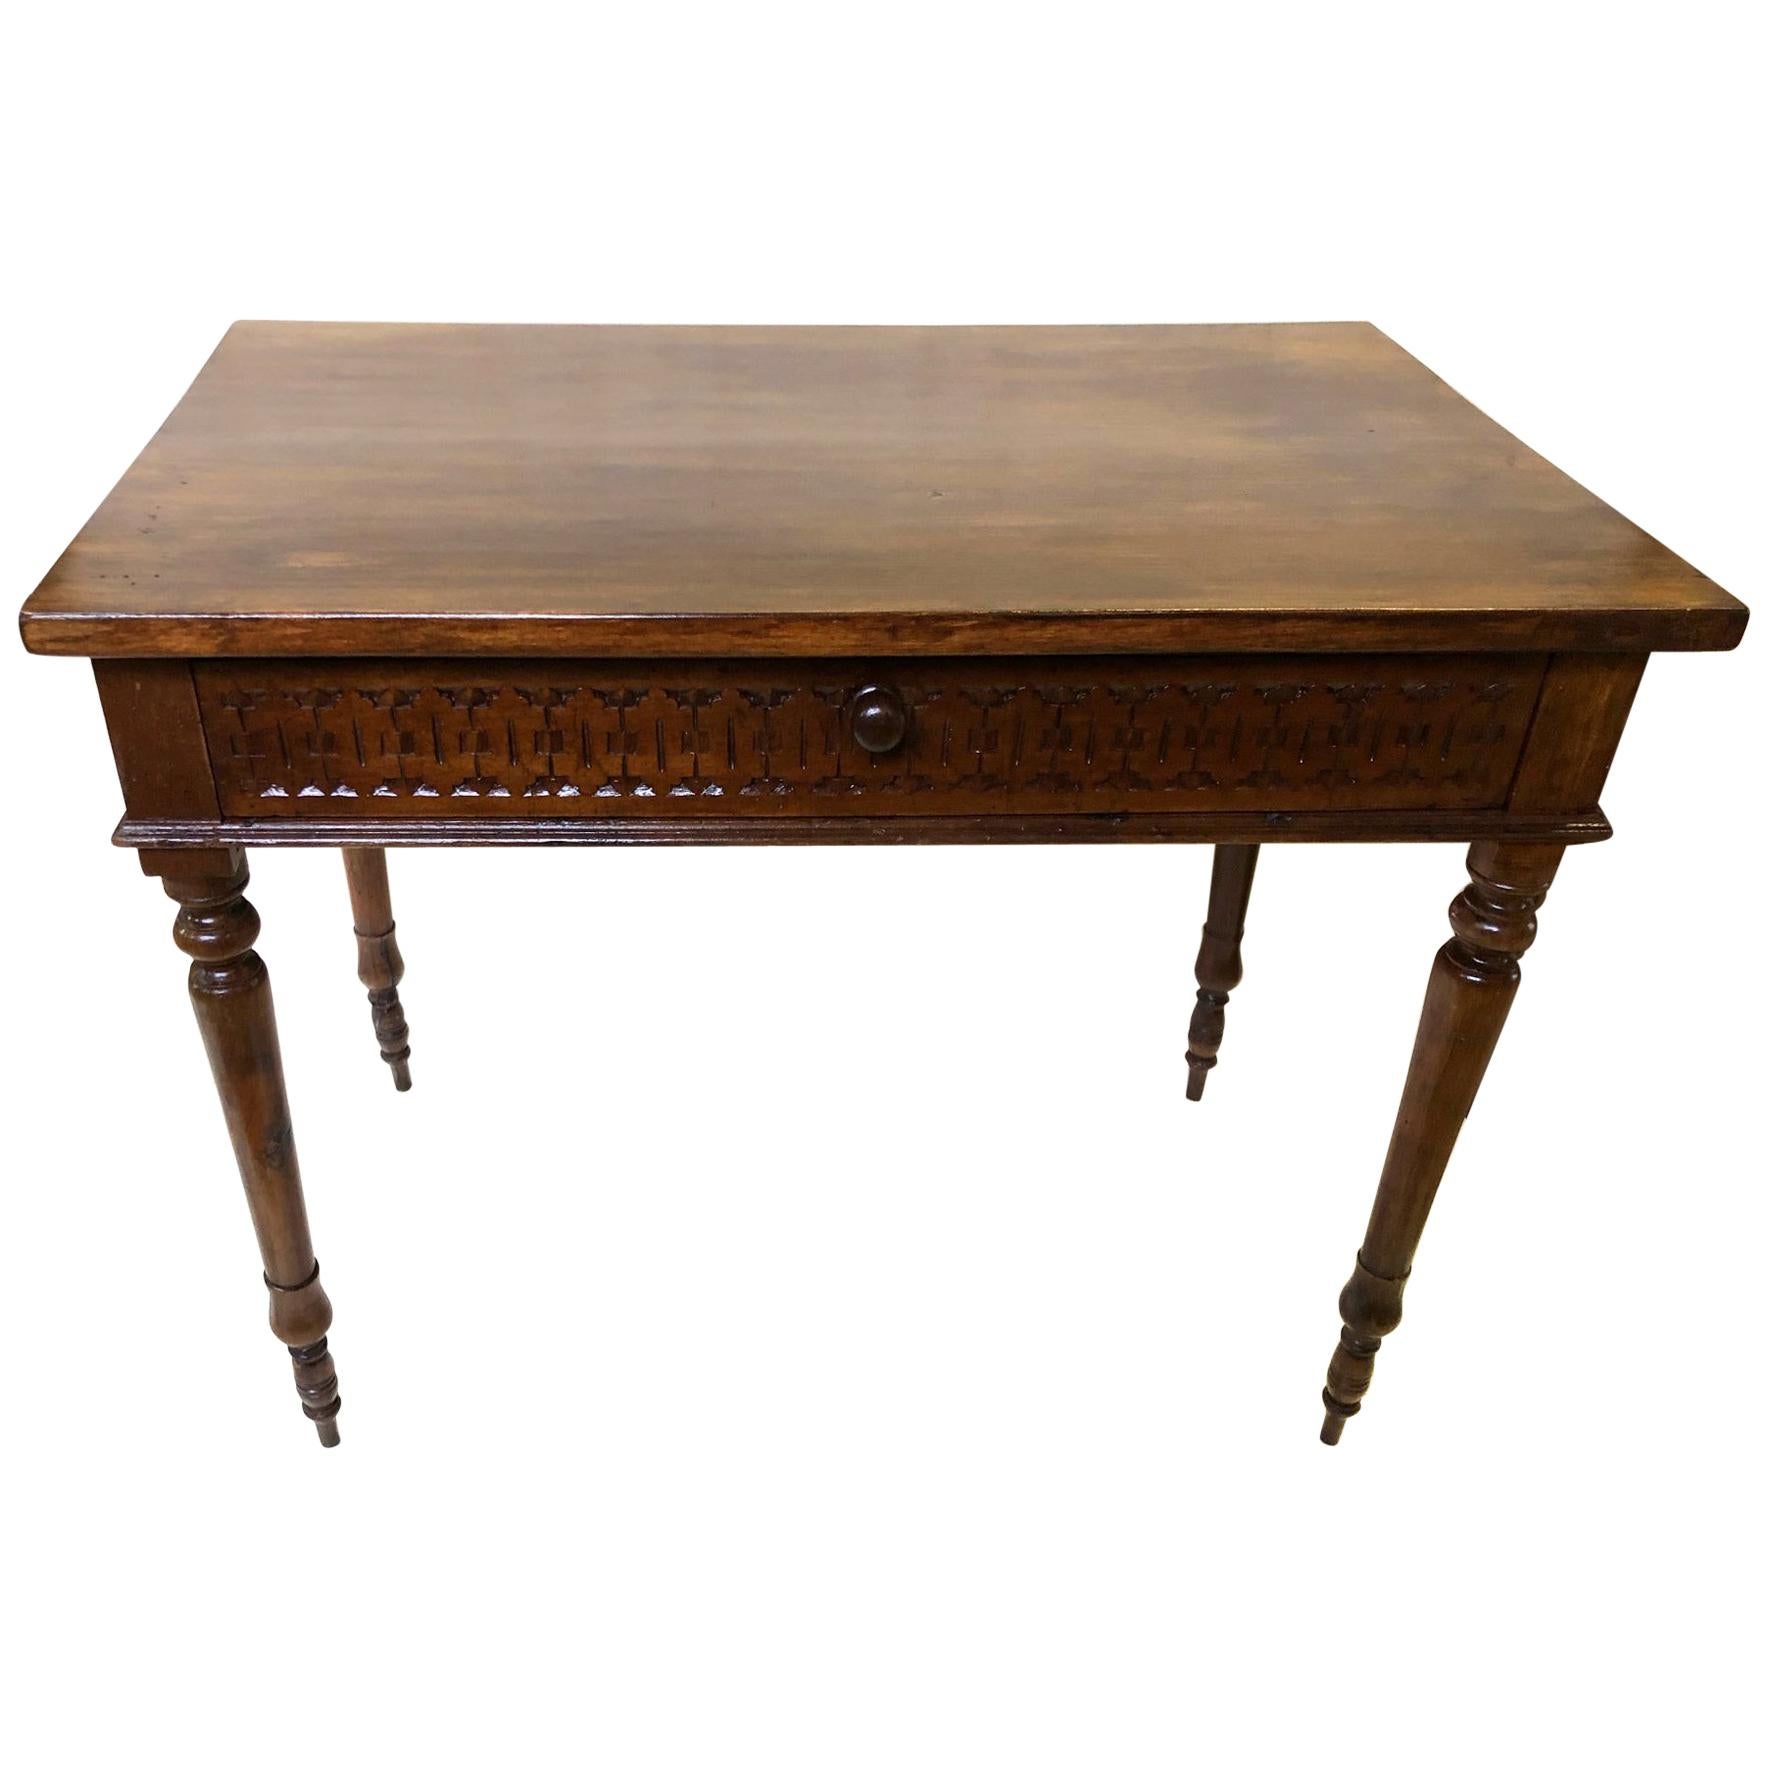 Original Italian Desk Table in Walnut with Perimeter Carvings from 1880